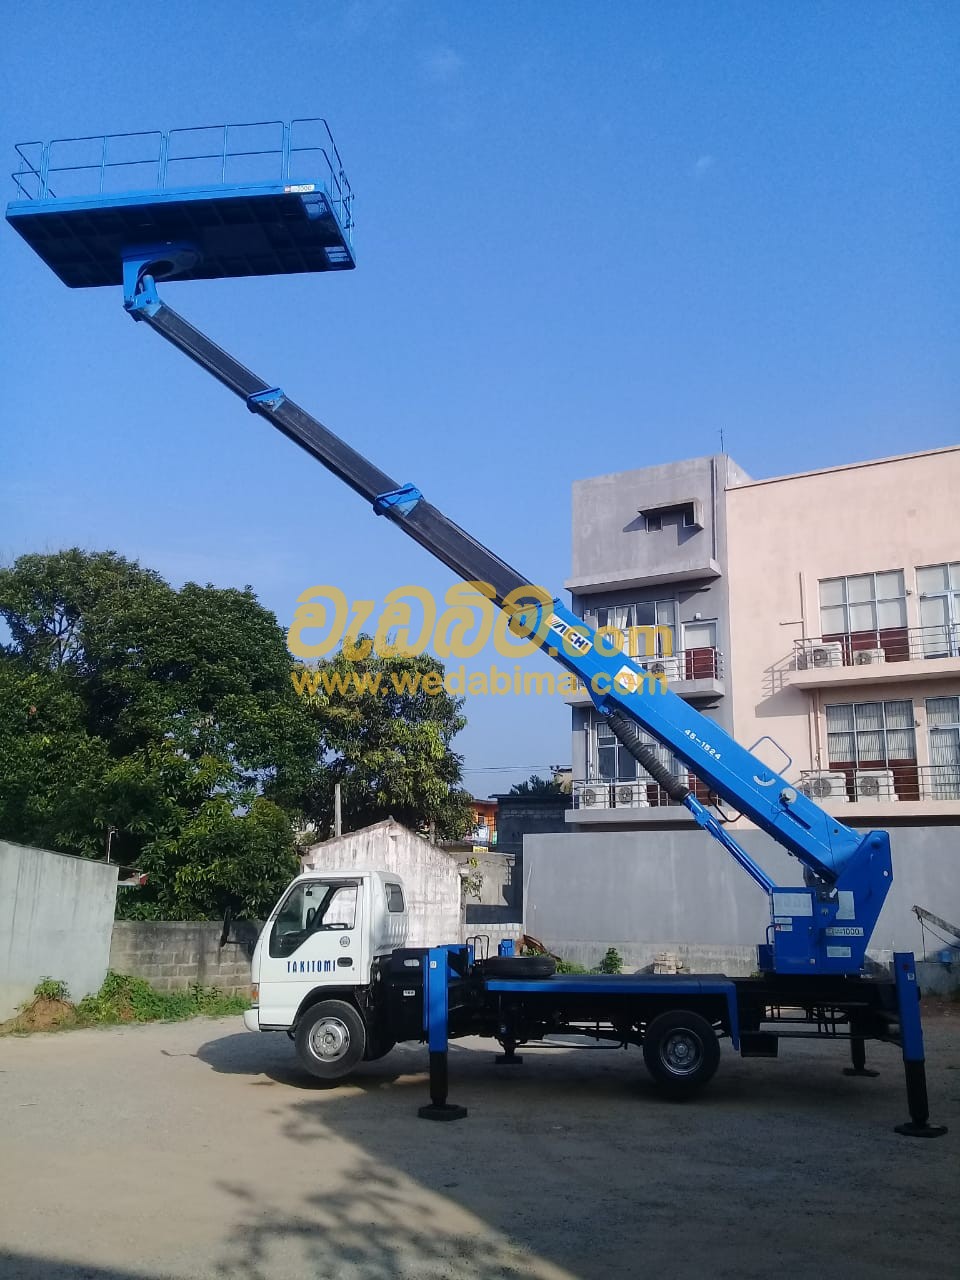 Cover image for Aerial Work Platforms Suppliers in Sri Lanka